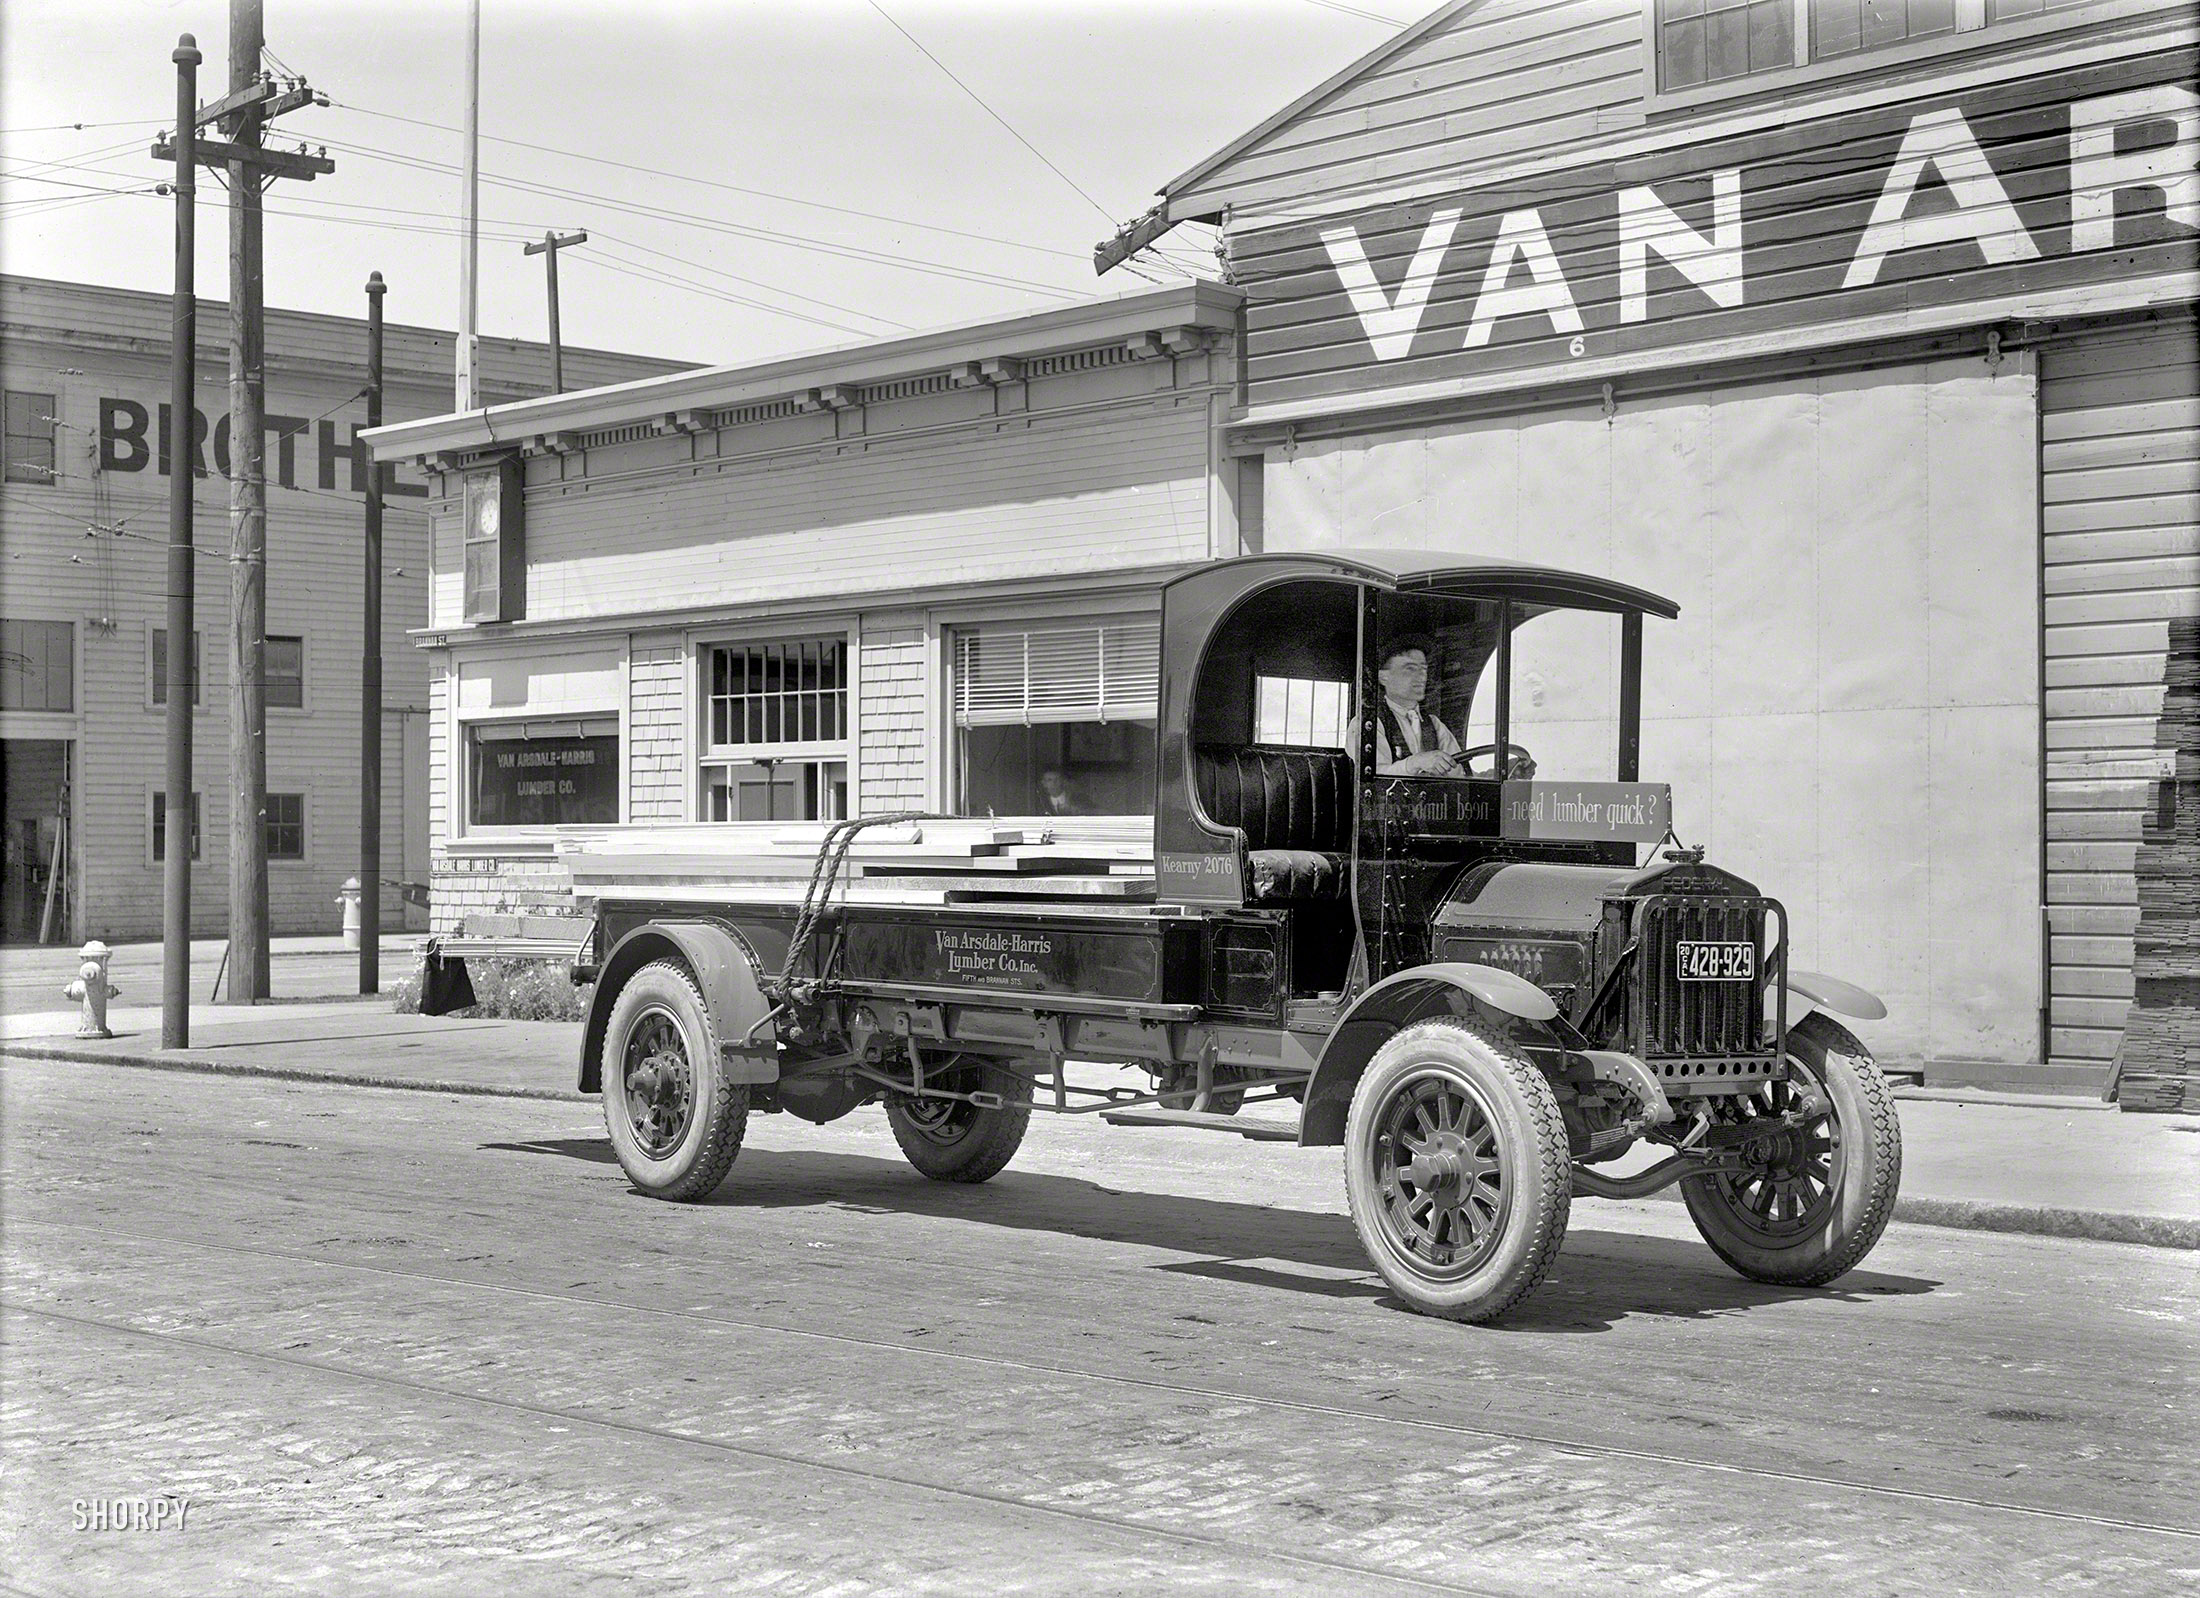 San Francisco in 1920. "Federal truck -- Van Arsdale-Harris Lumber Co., Fifth and Brannan." 5x7 glass negative by Christopher Helin. View full size.